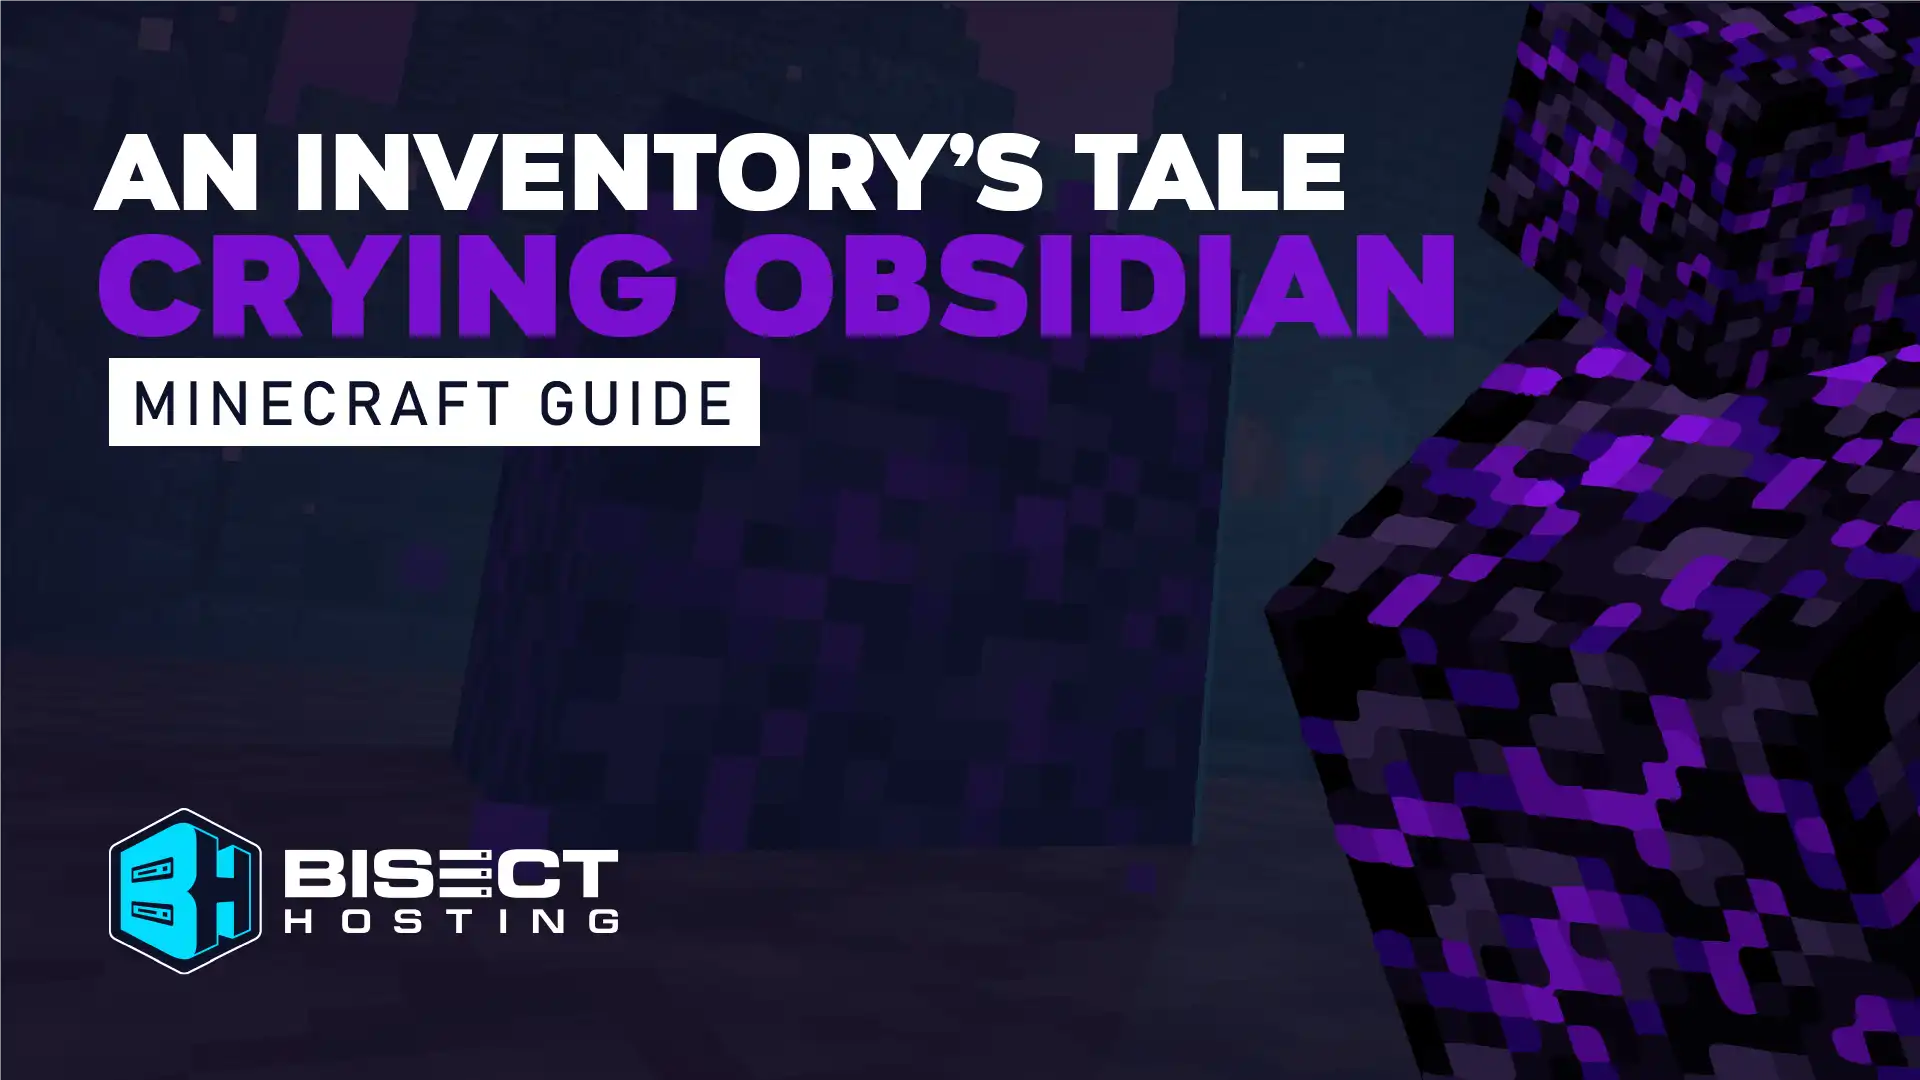 An Inventory’s Tale: Crying Obsidian